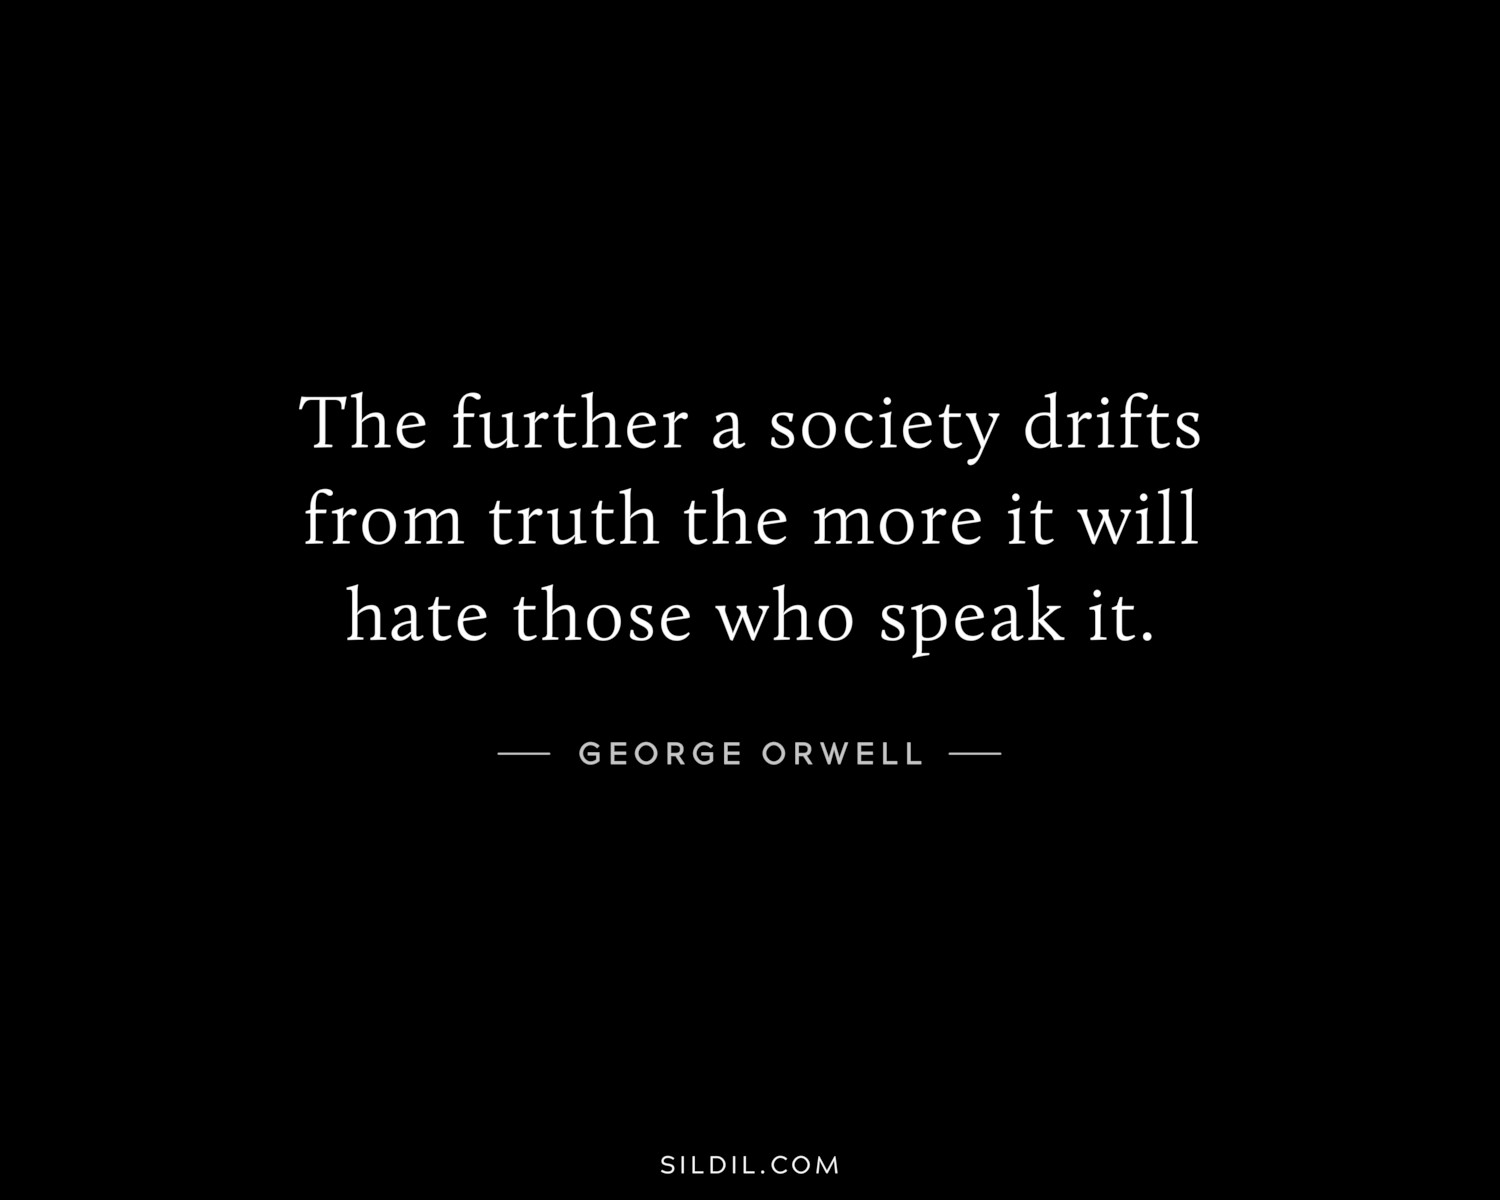 The further a society drifts from truth the more it will hate those who speak it.